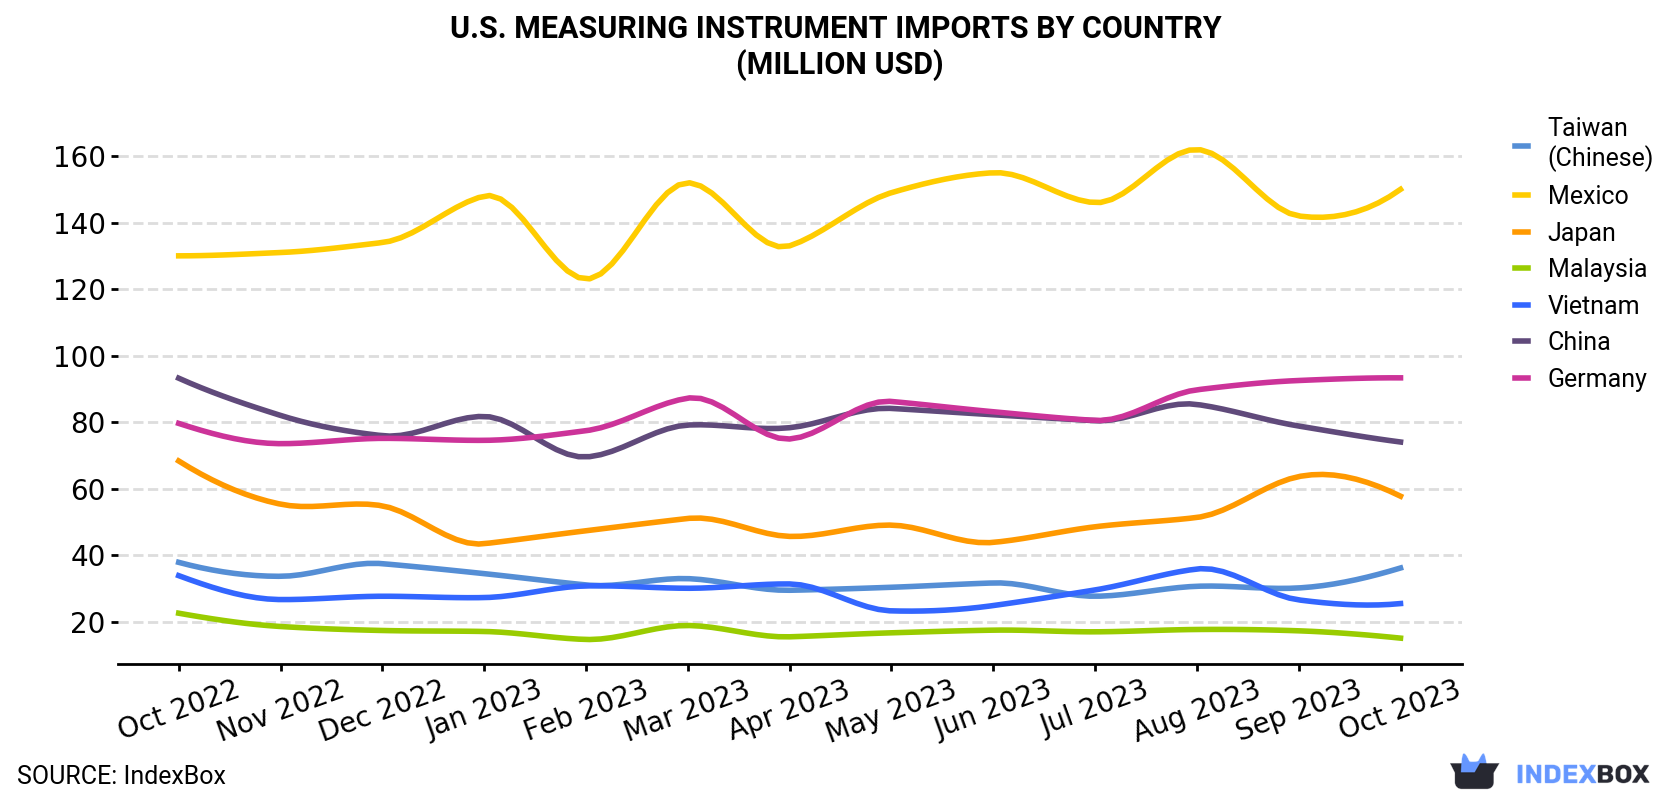 U.S. Measuring Instrument Imports By Country (Million USD)